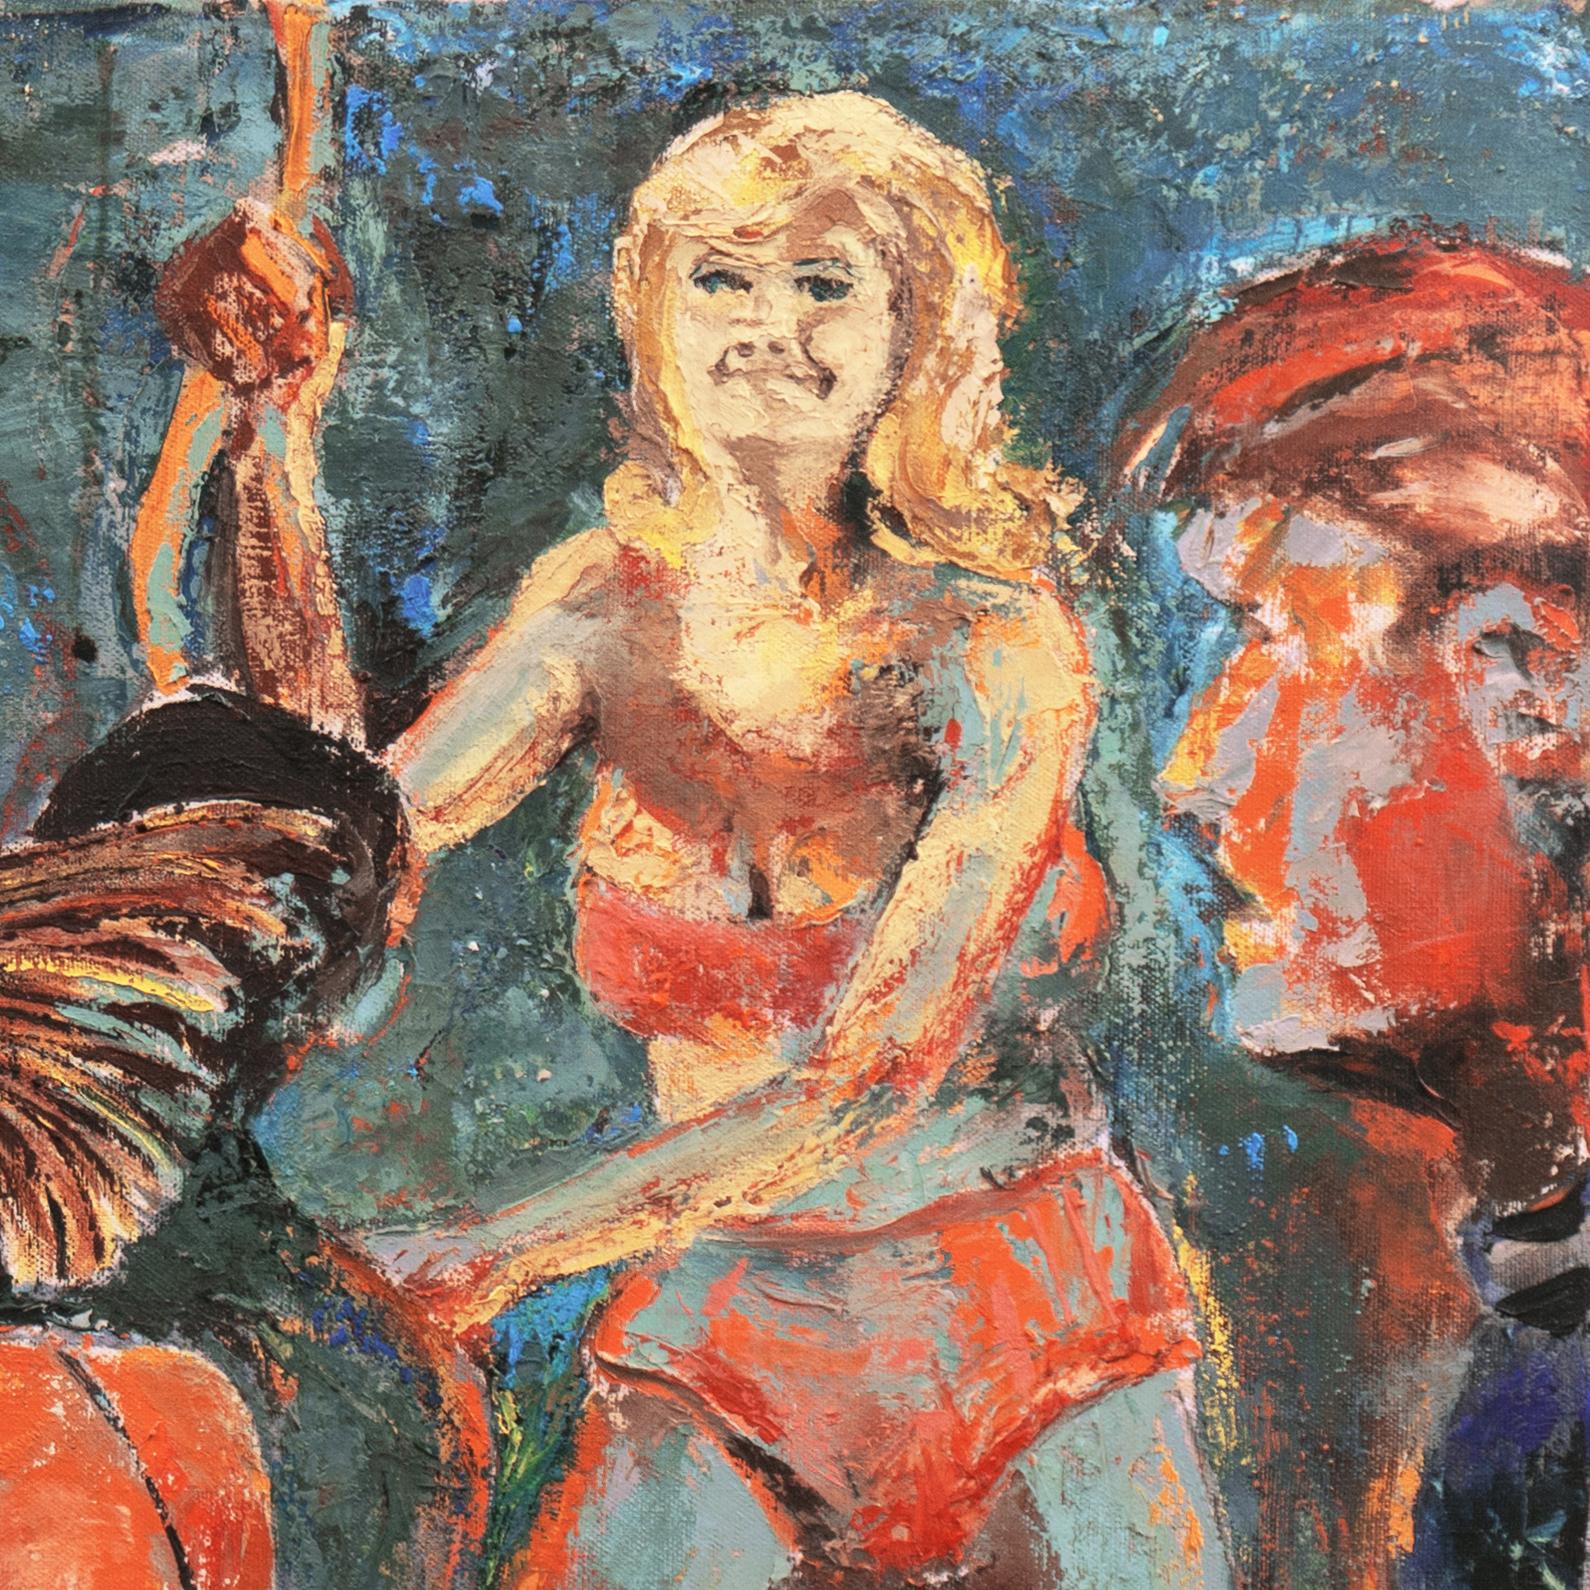 'Go, Igor, Go!', 1960's Night Club Go-Go Dancers, Large Post-Impressionist Oil - Expressionist Painting by Dick Phillips